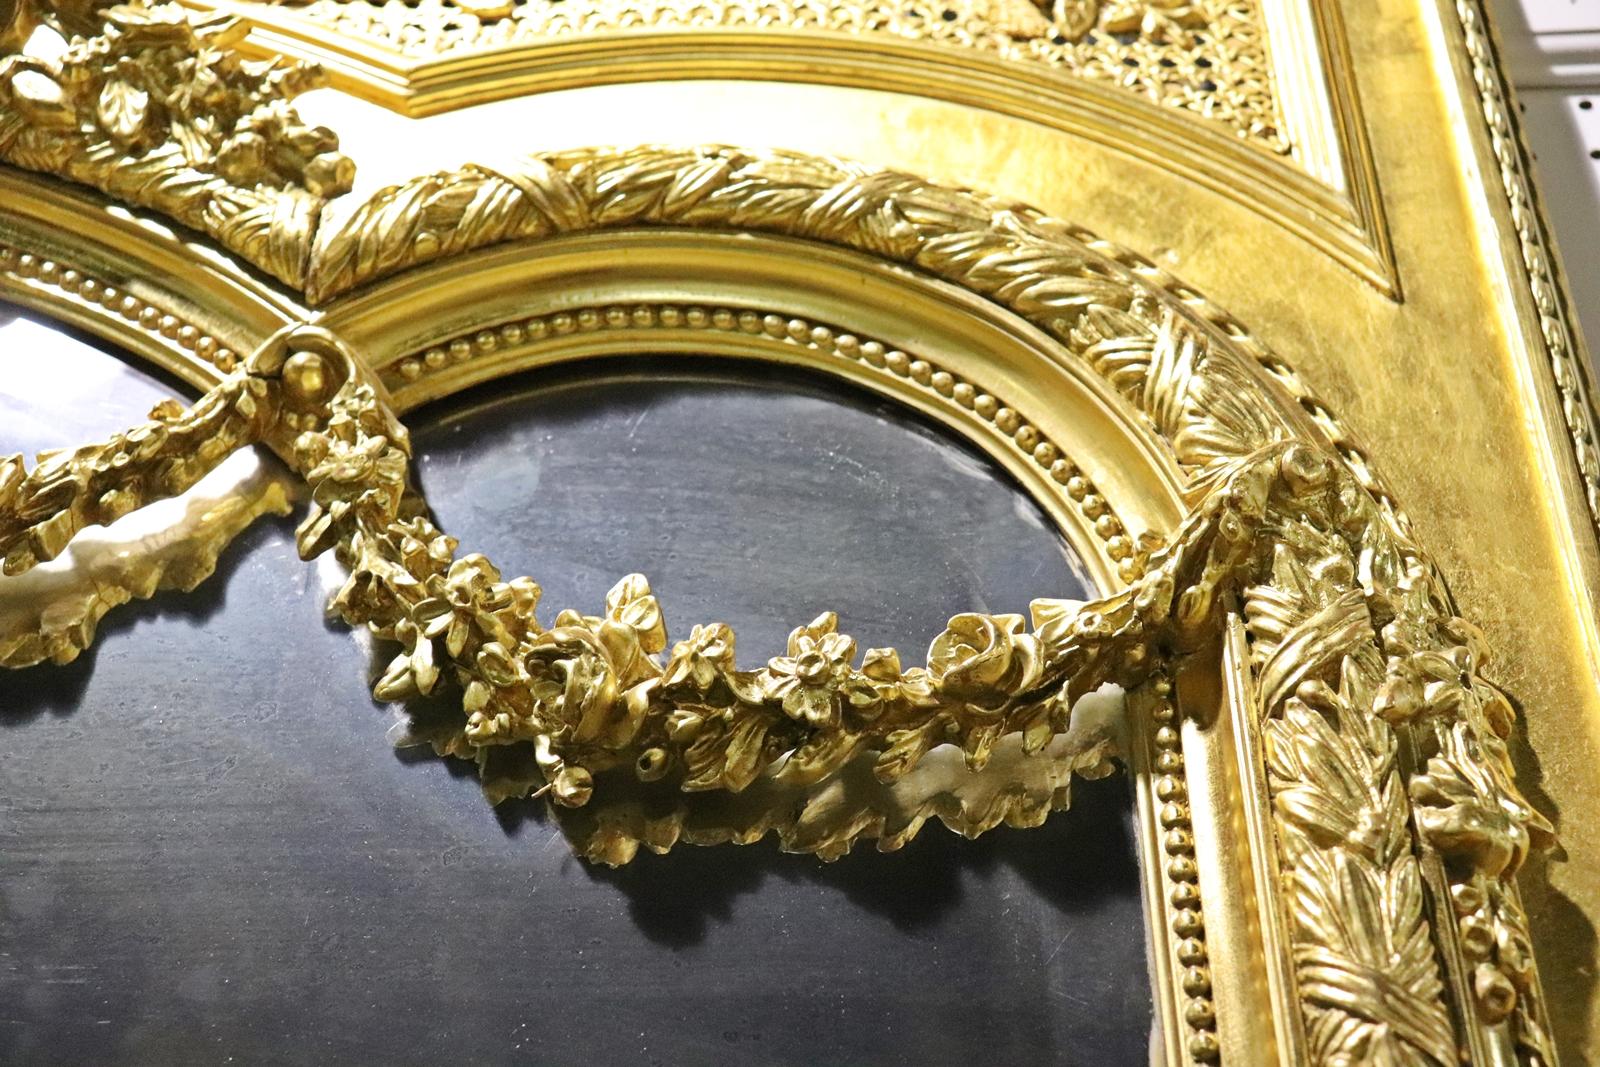 Monumental Gilded French Louis XV Trumeau Mirror with Planter Base Circa 1890 For Sale 4